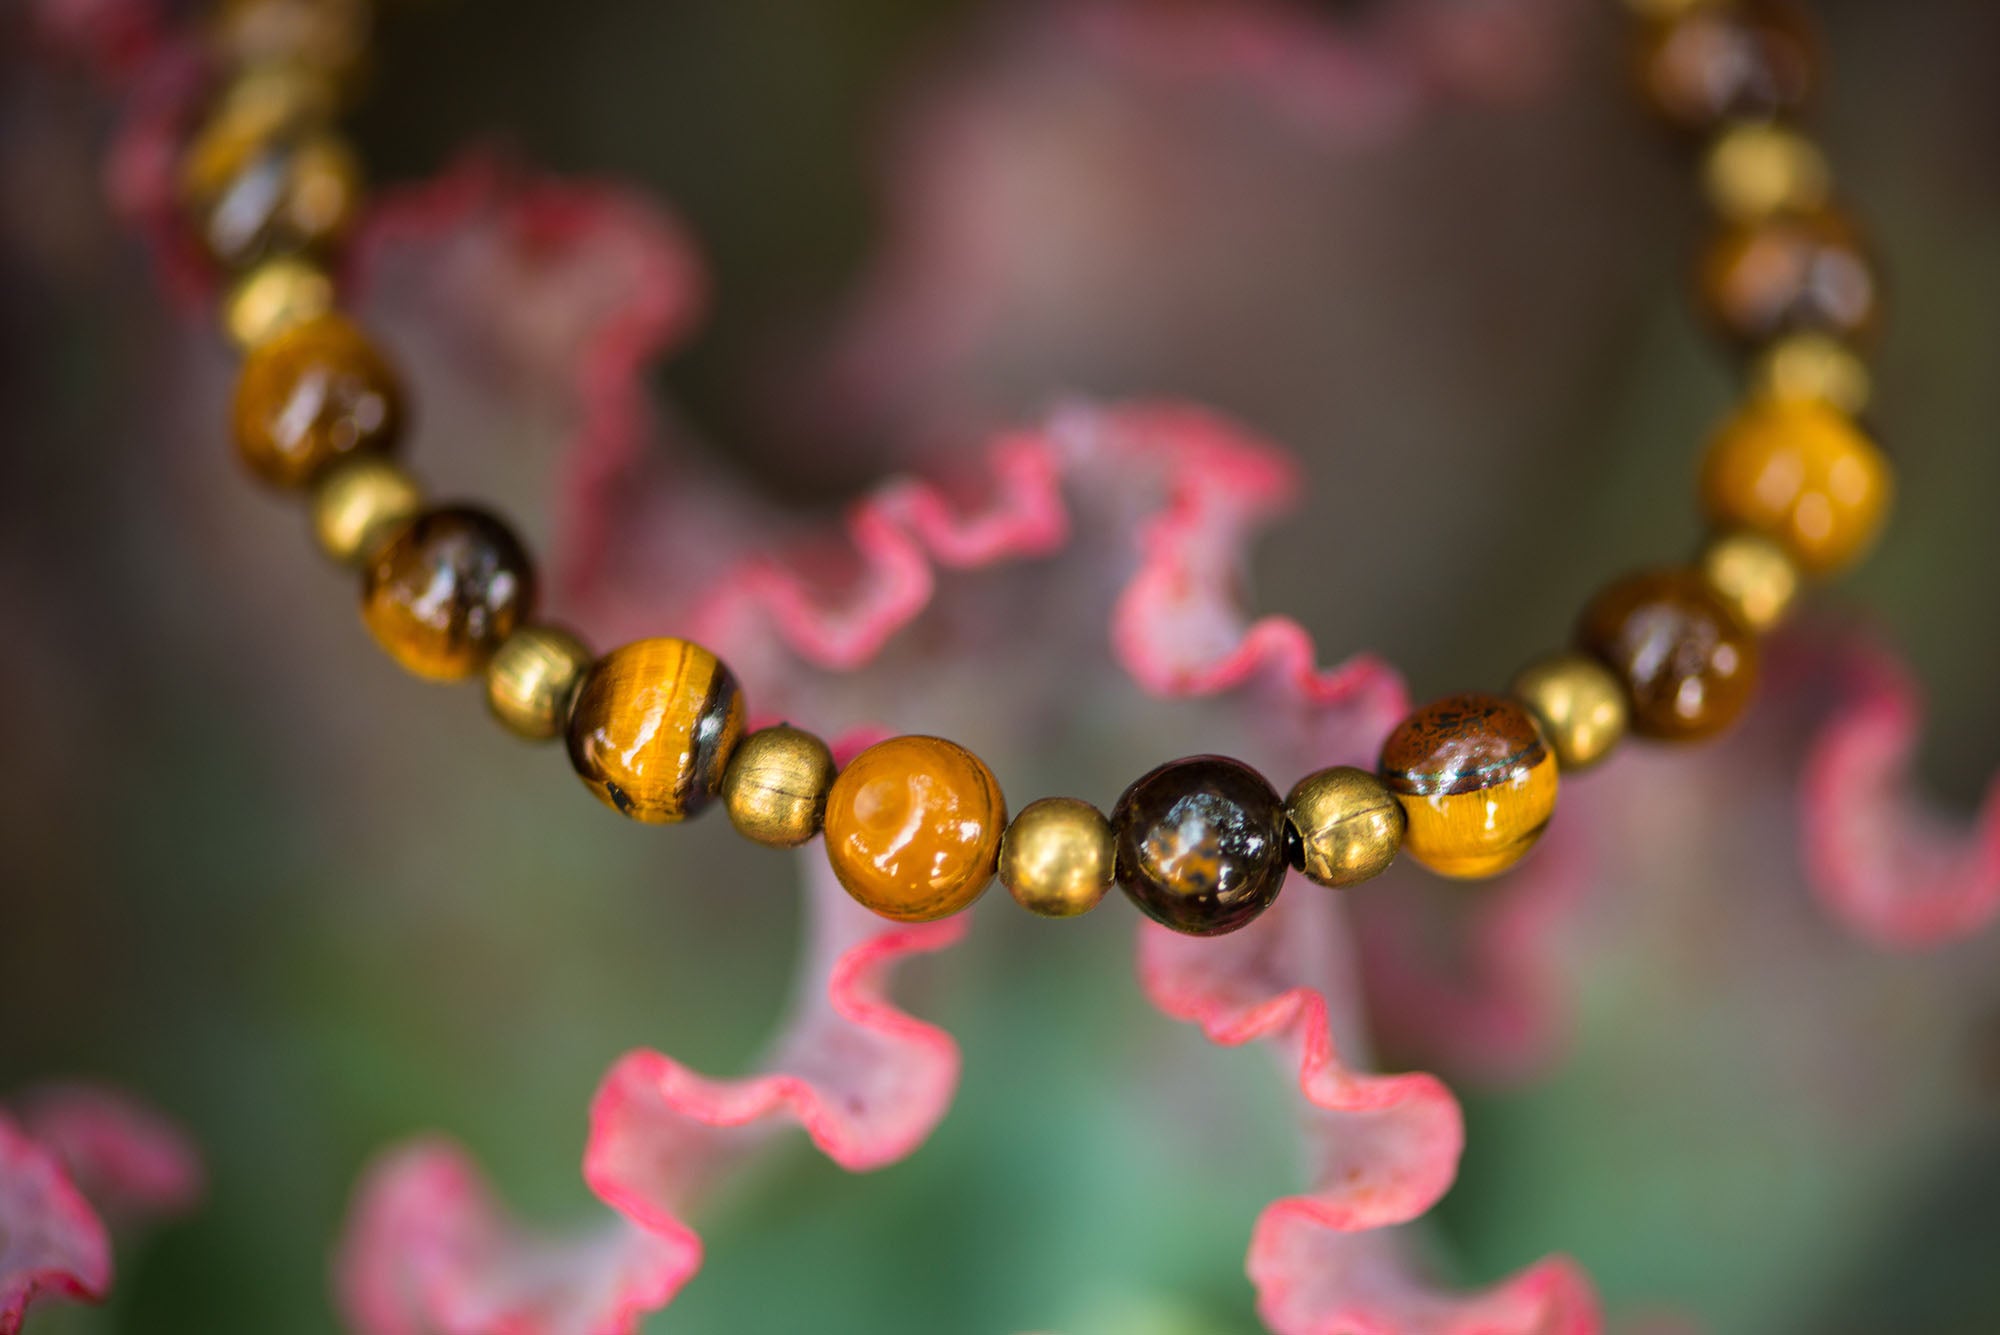 South African Tiger's Eye bracelet by Wild In Africa